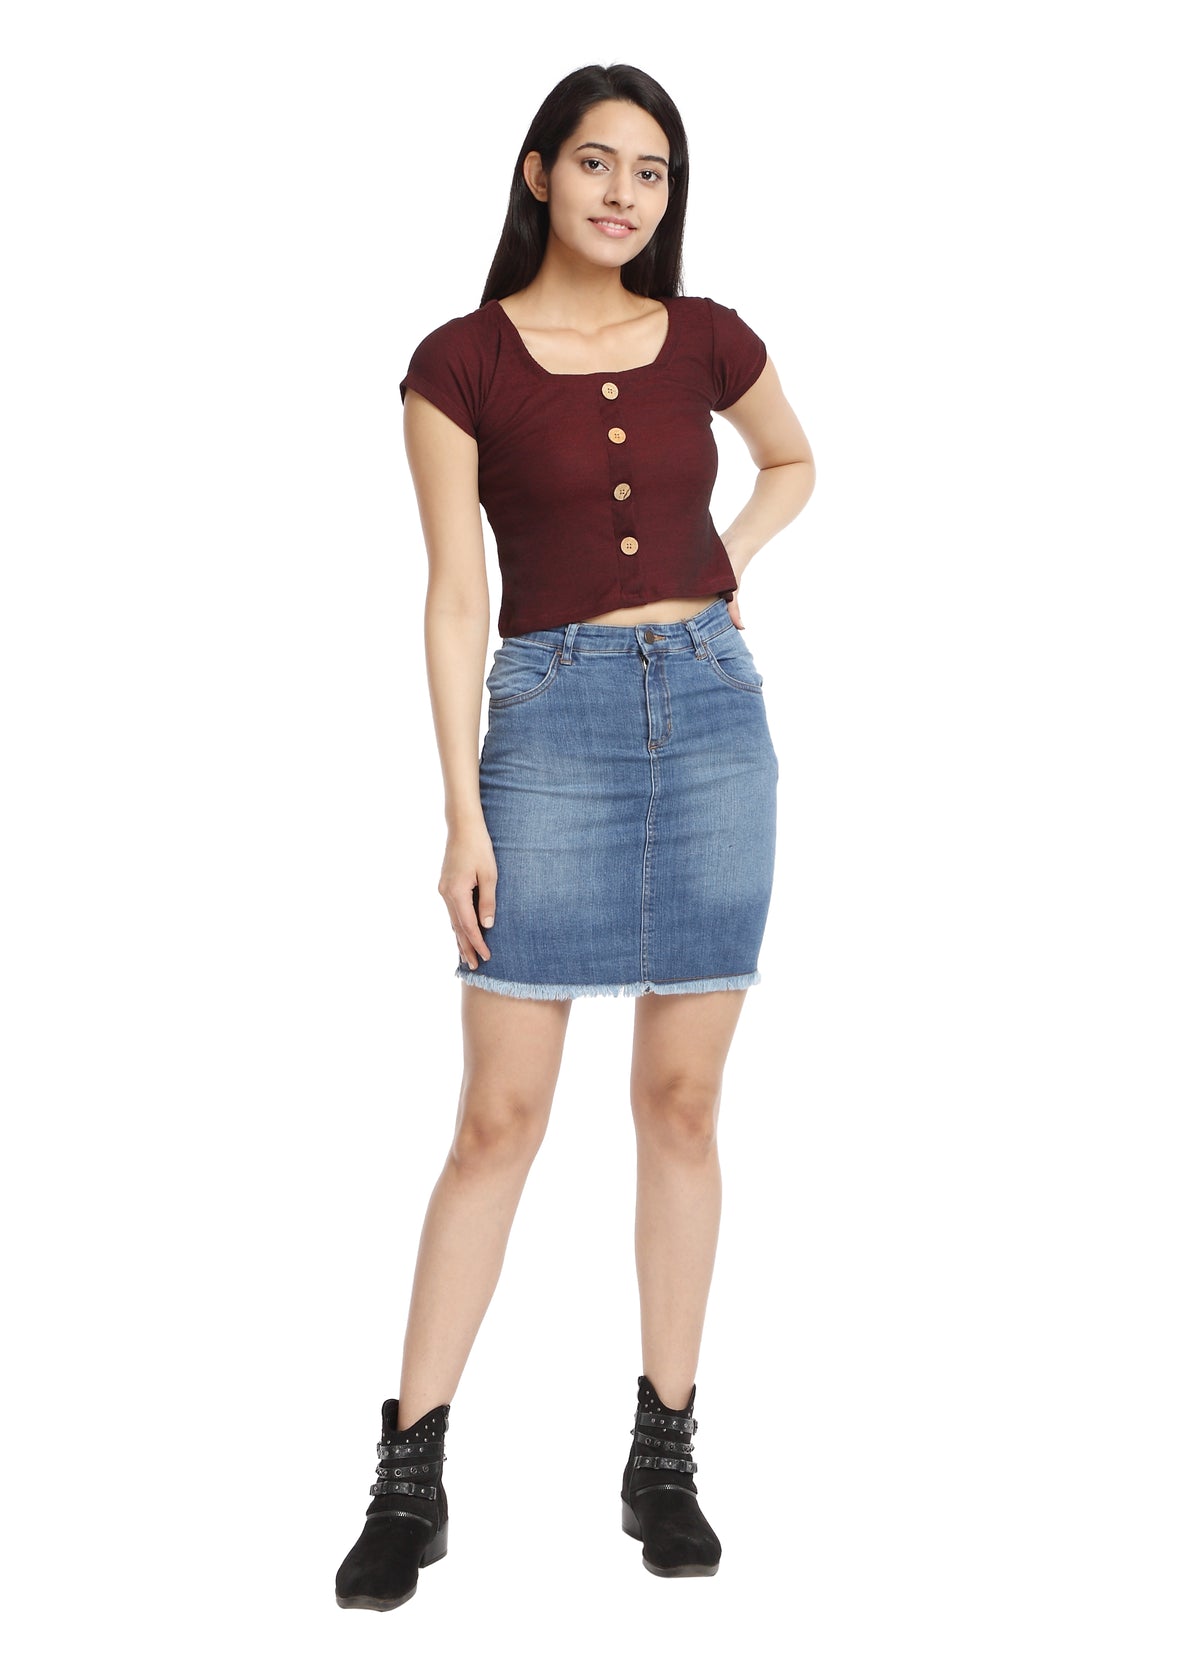 Maroon Ribbed knit crop top with buttons